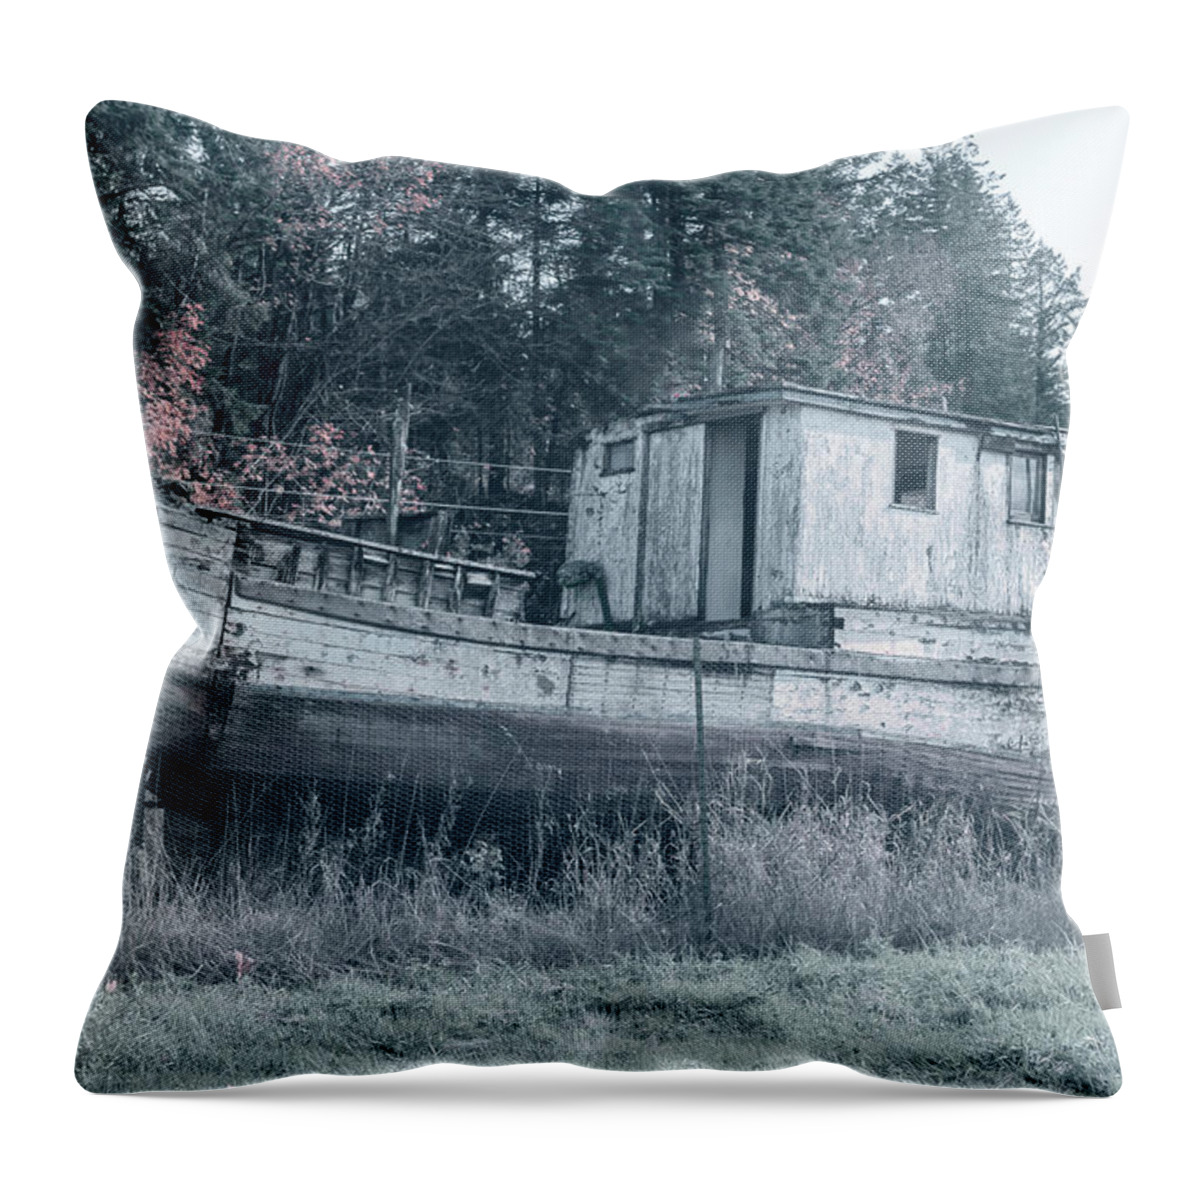 Weathered Boat Throw Pillow featuring the photograph Abandoned Relic Boat 2121 by Cathy Anderson